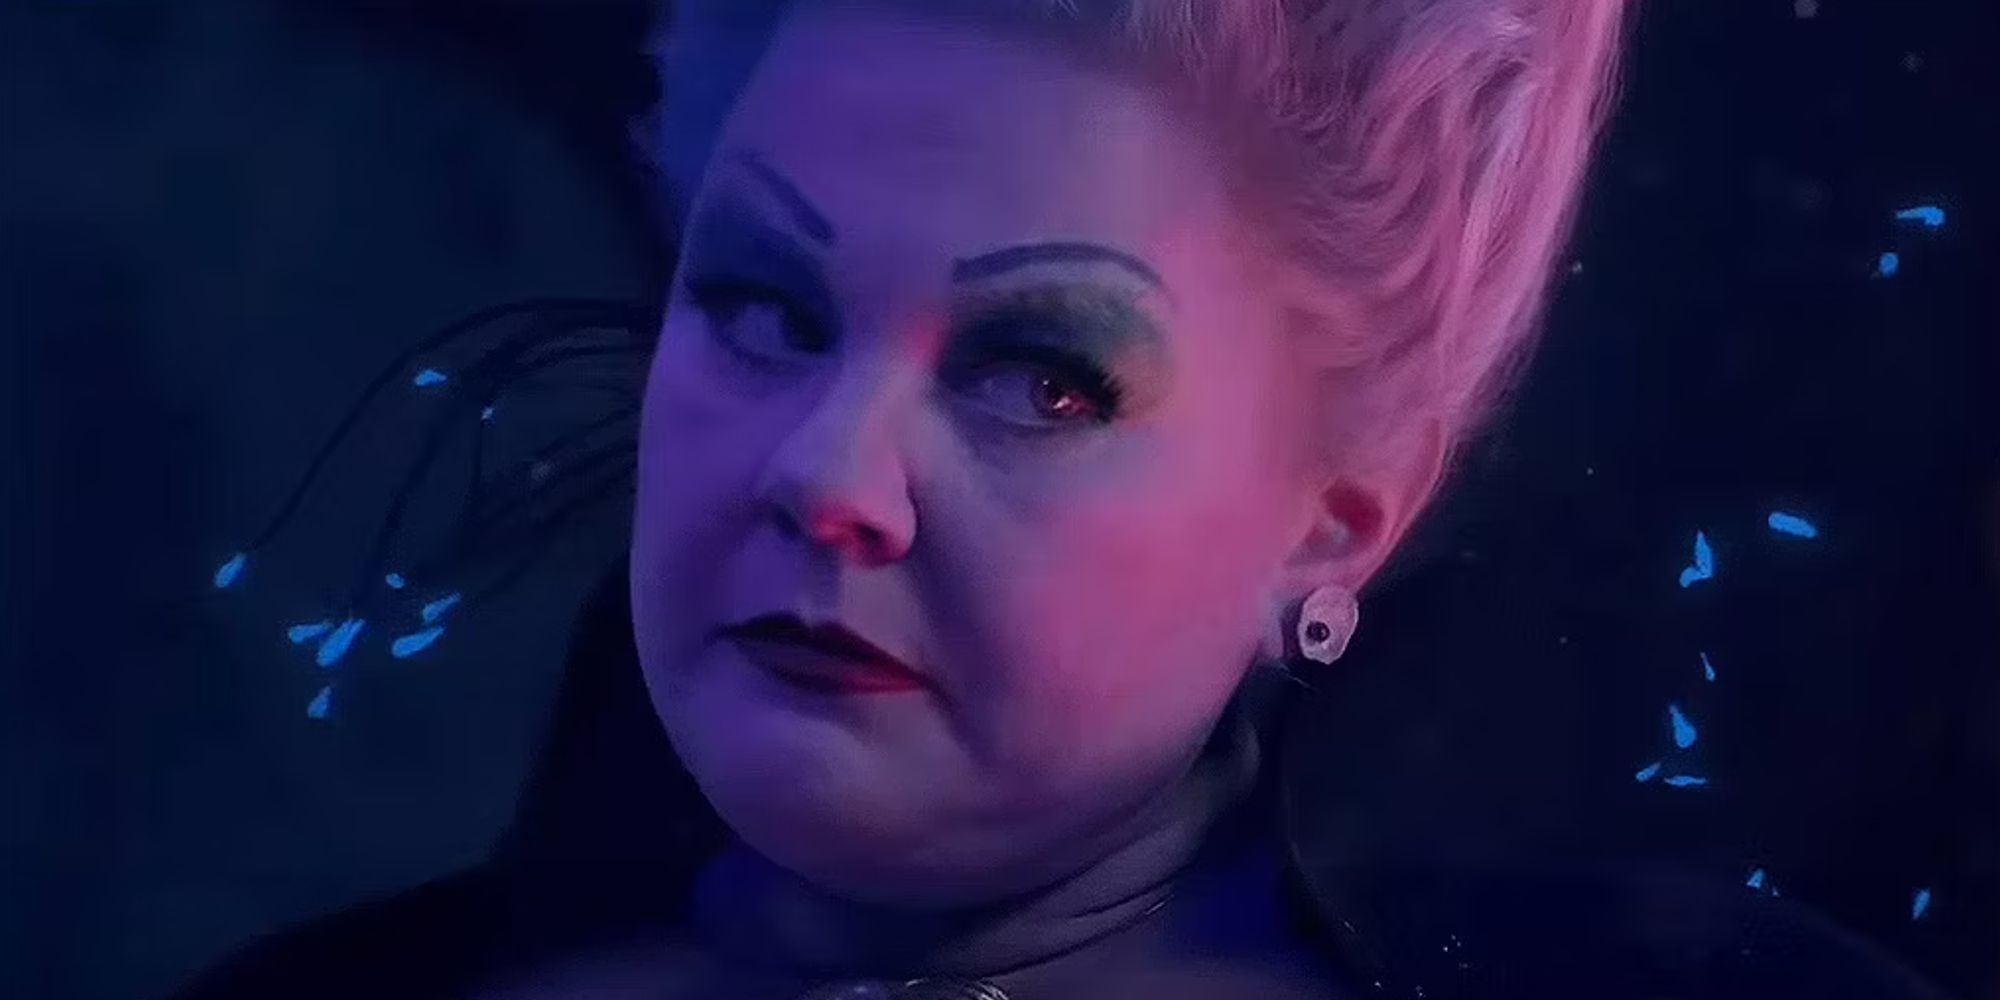 “She’s Totally Misunderstood” Ursula’s Villainy Defended By The Little